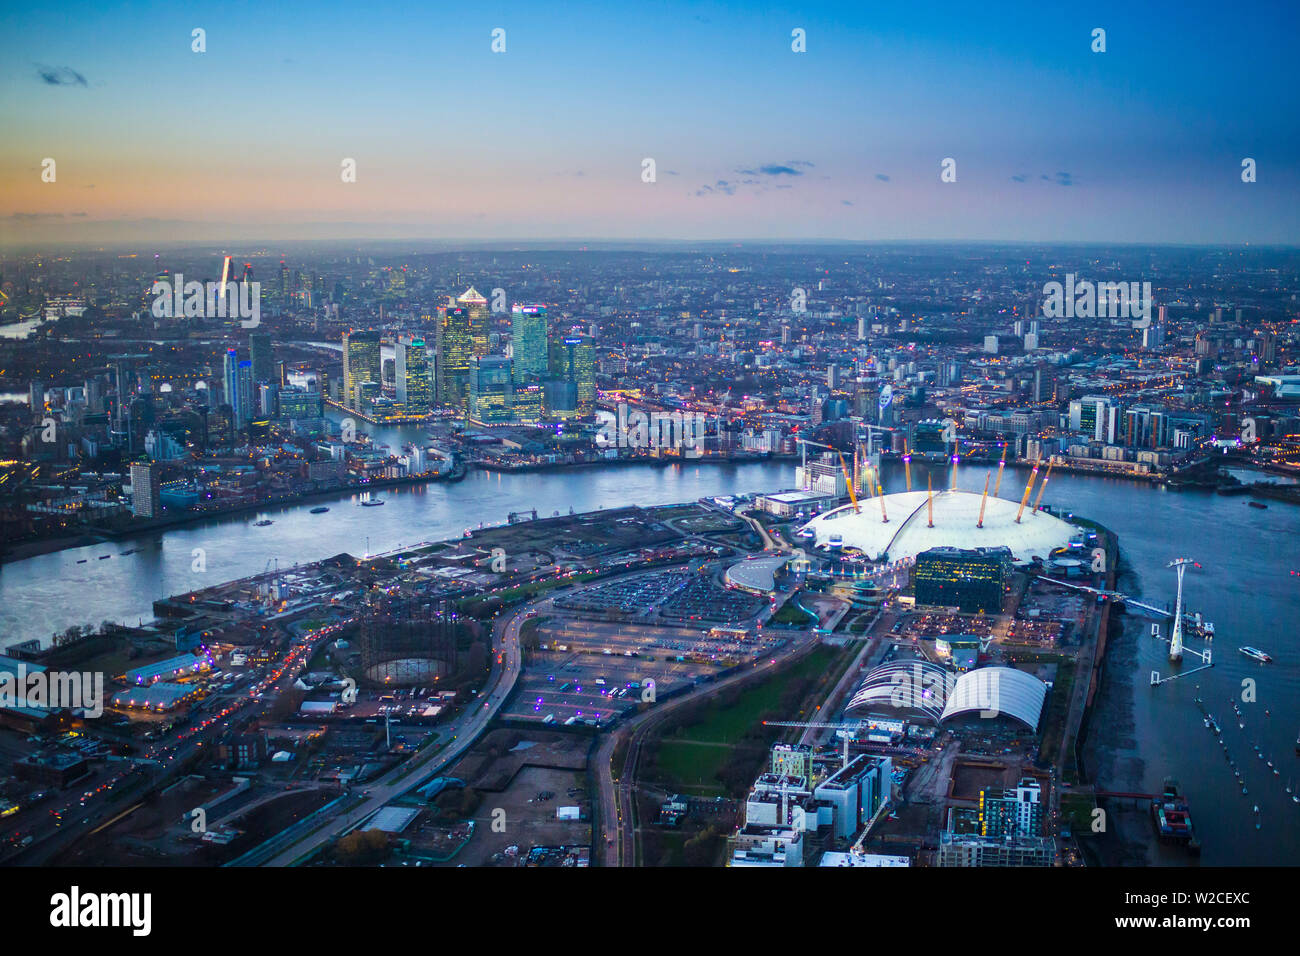 Vue aérienne sur O2 arena, Isle of Dogs et Canary Wharf, Londres, Angleterre Banque D'Images